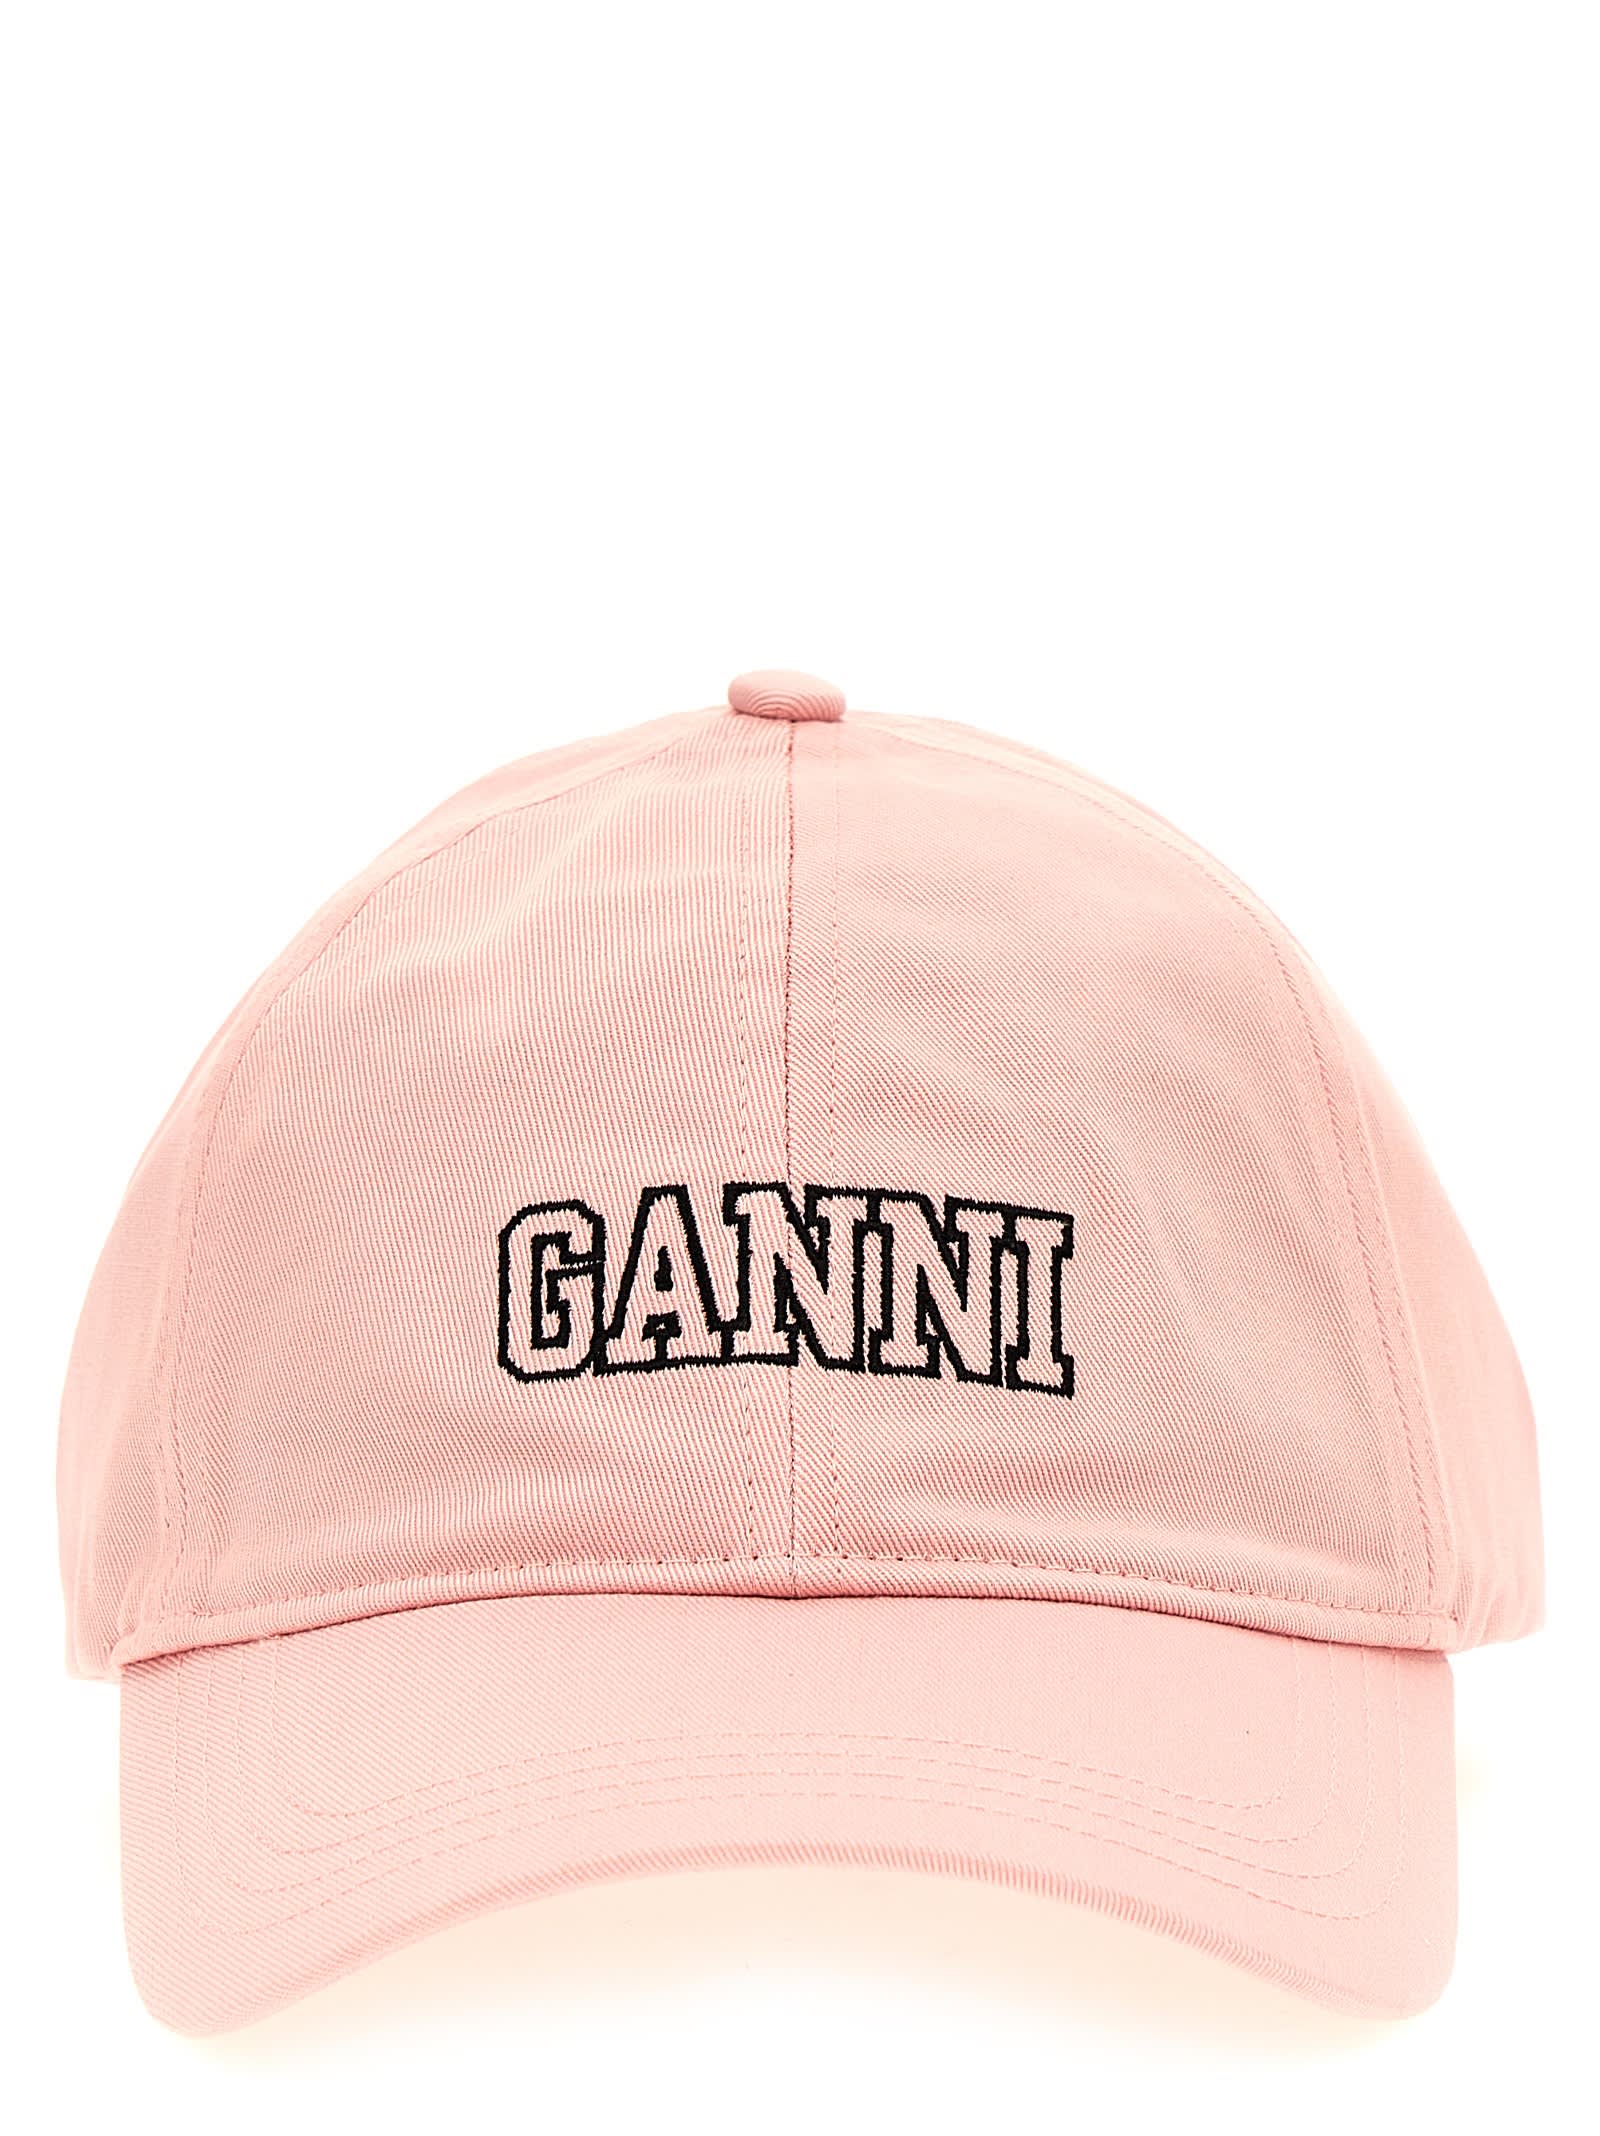 Ganni Logo Embroidery Cap In Pink